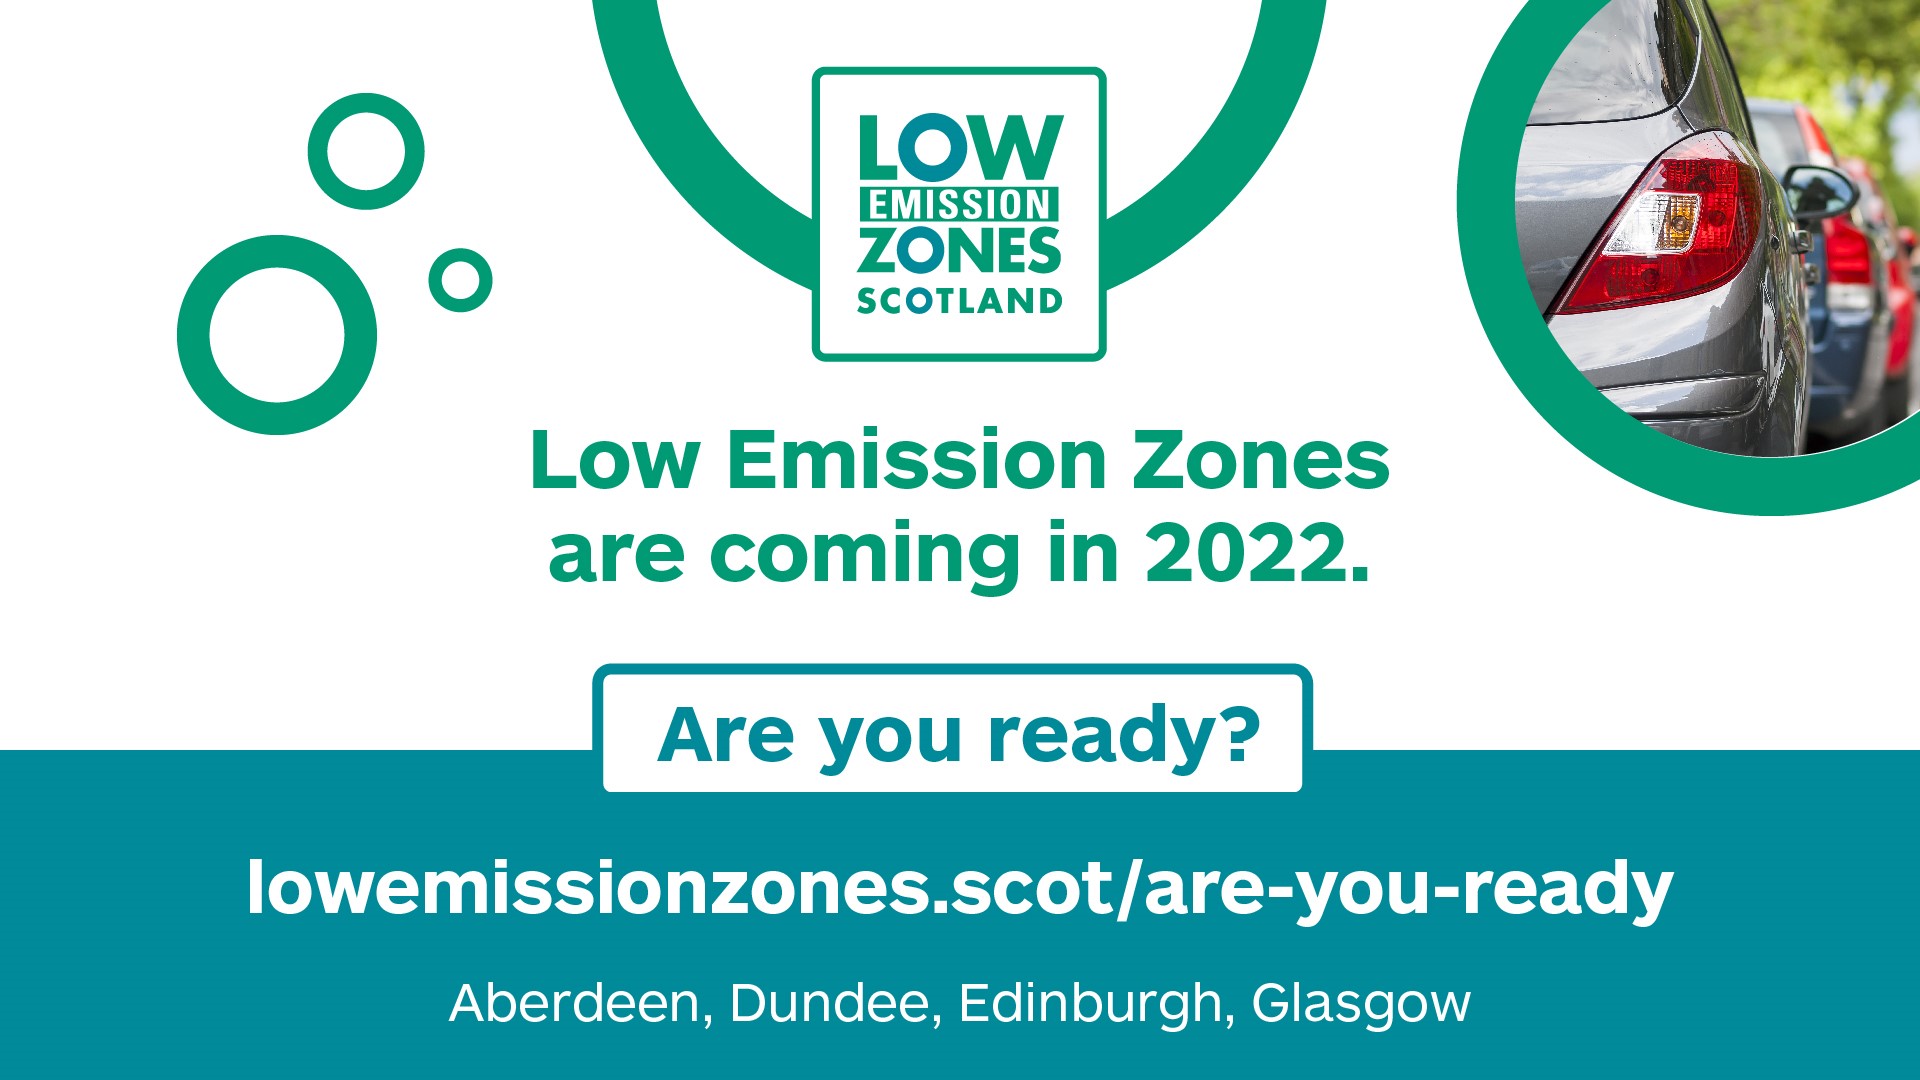 Low emission zone flyer with logo and message are you ready